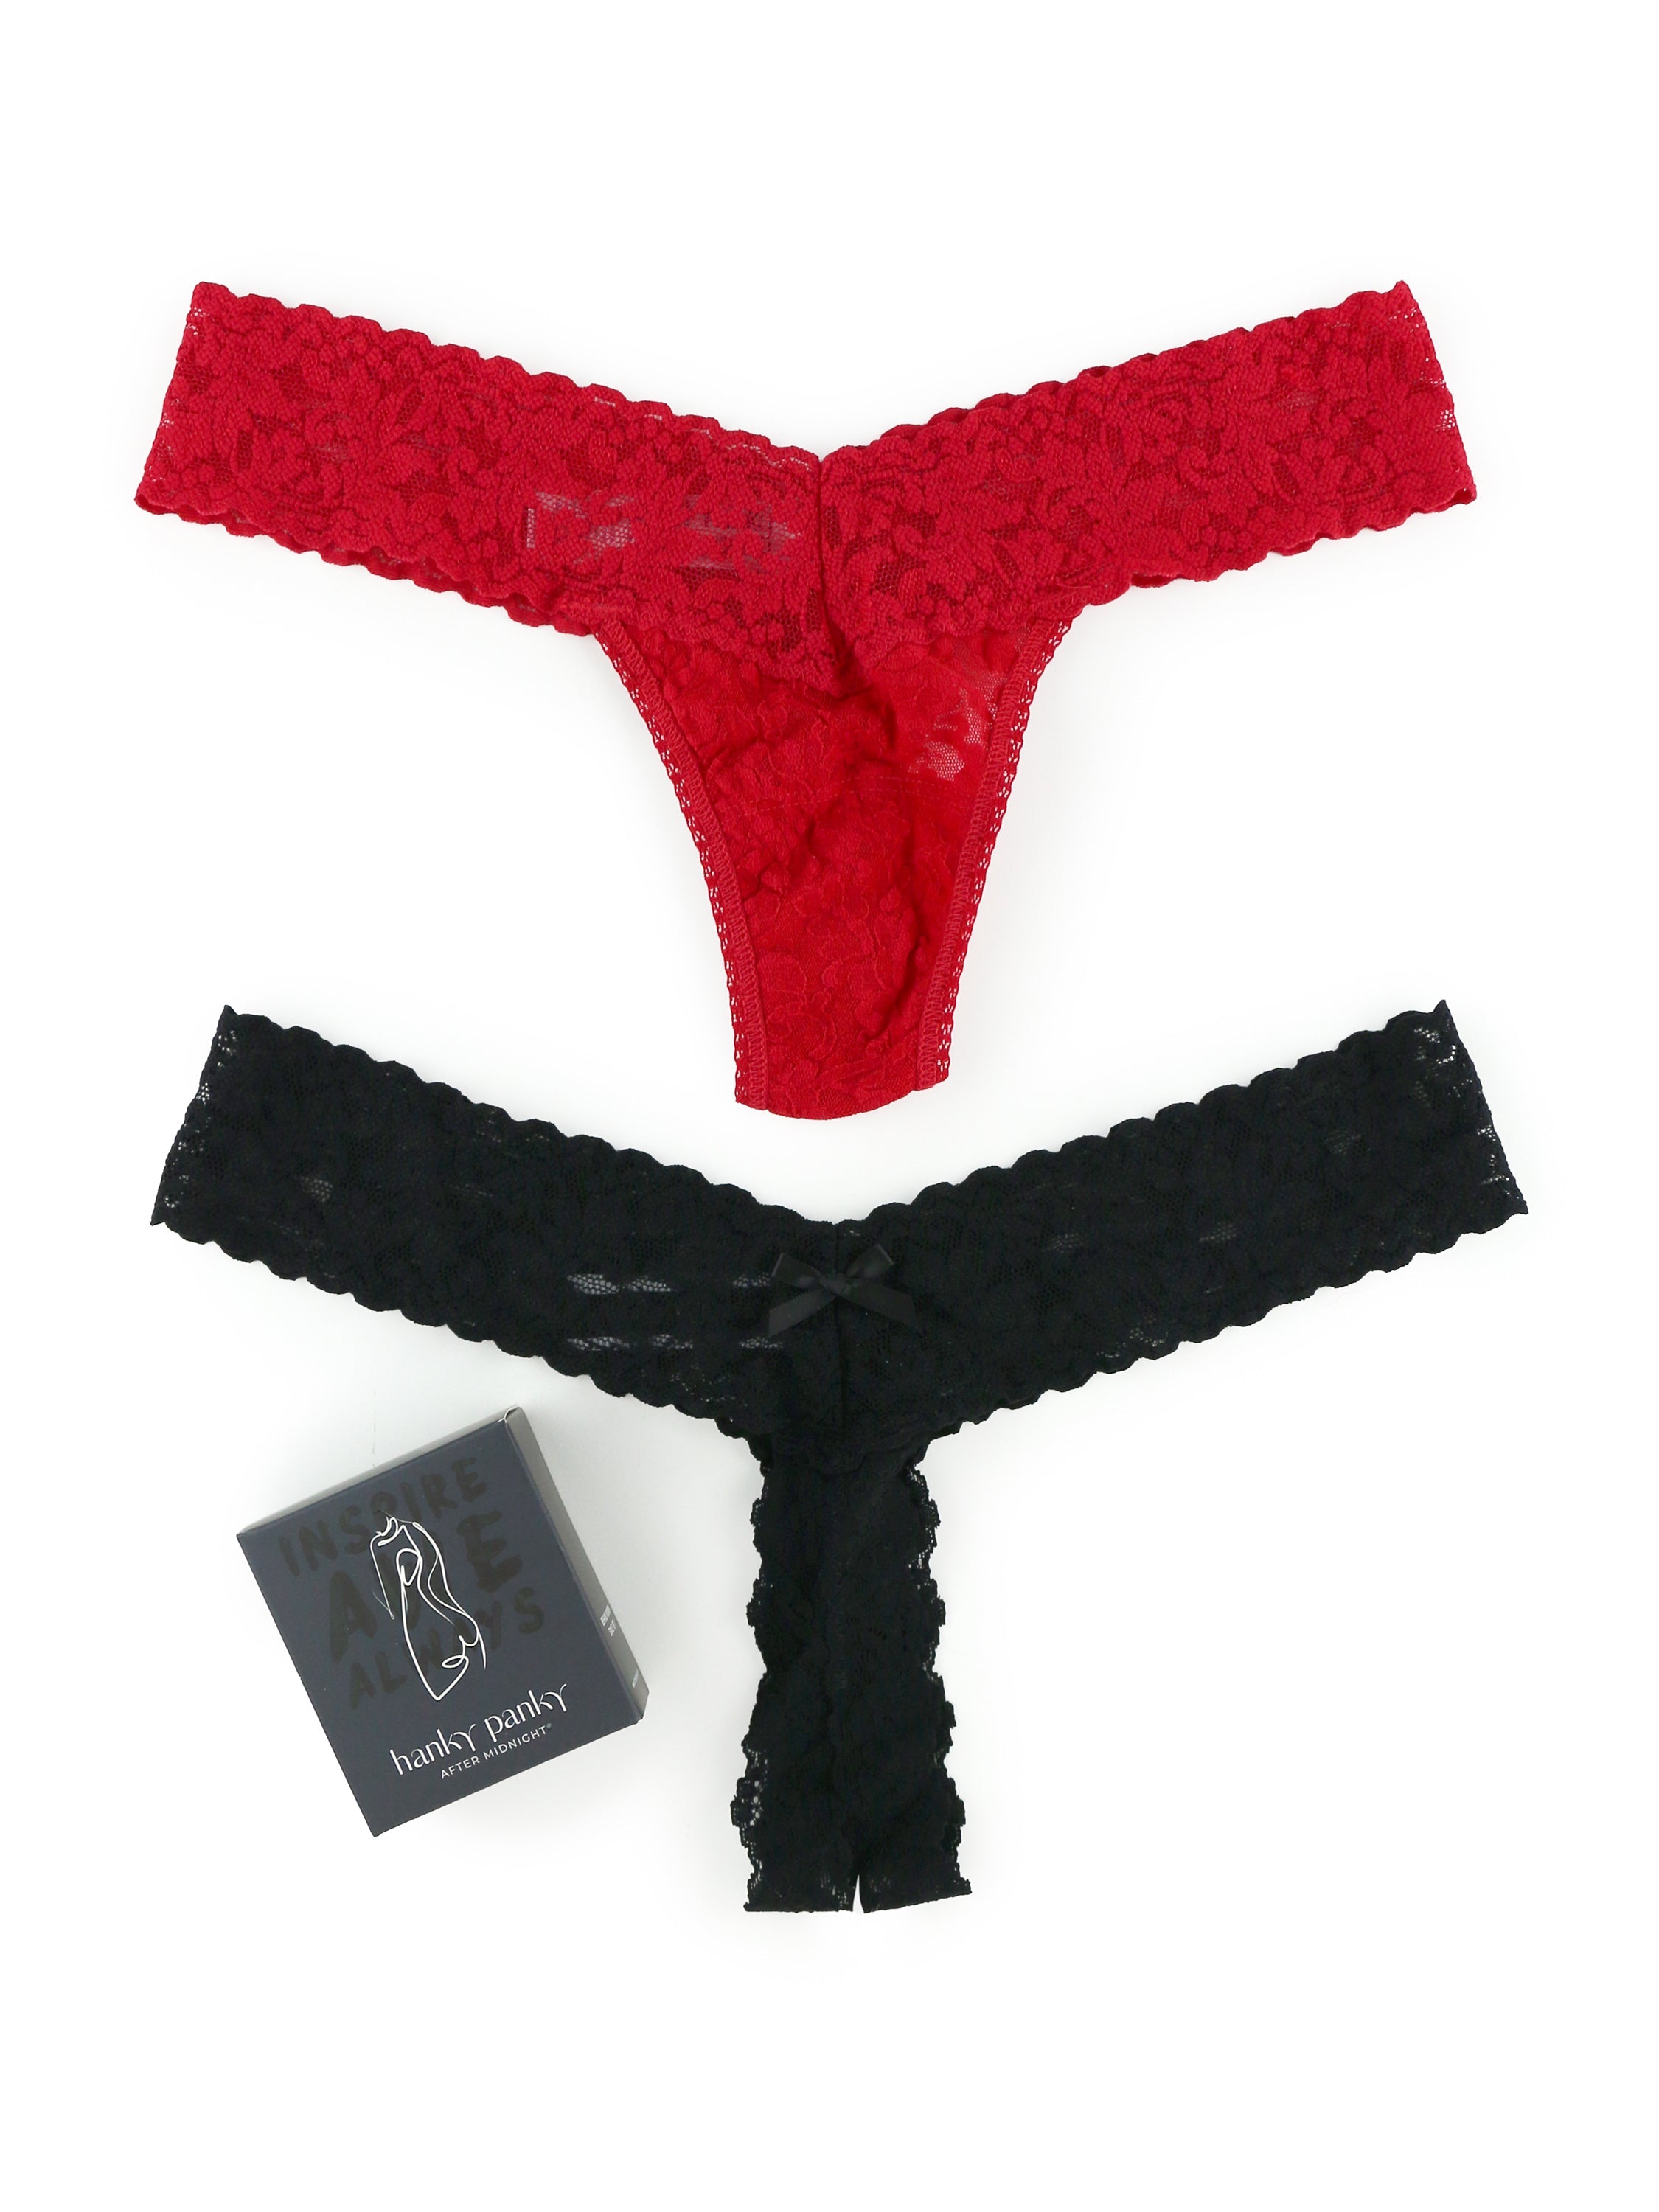 Red Lace Crotchless Panties for a Woman, Sexy Panties for Amazing Underwear  Experience, Great Gift for Girlfriend, Red Lace Lingerie Item -  Canada